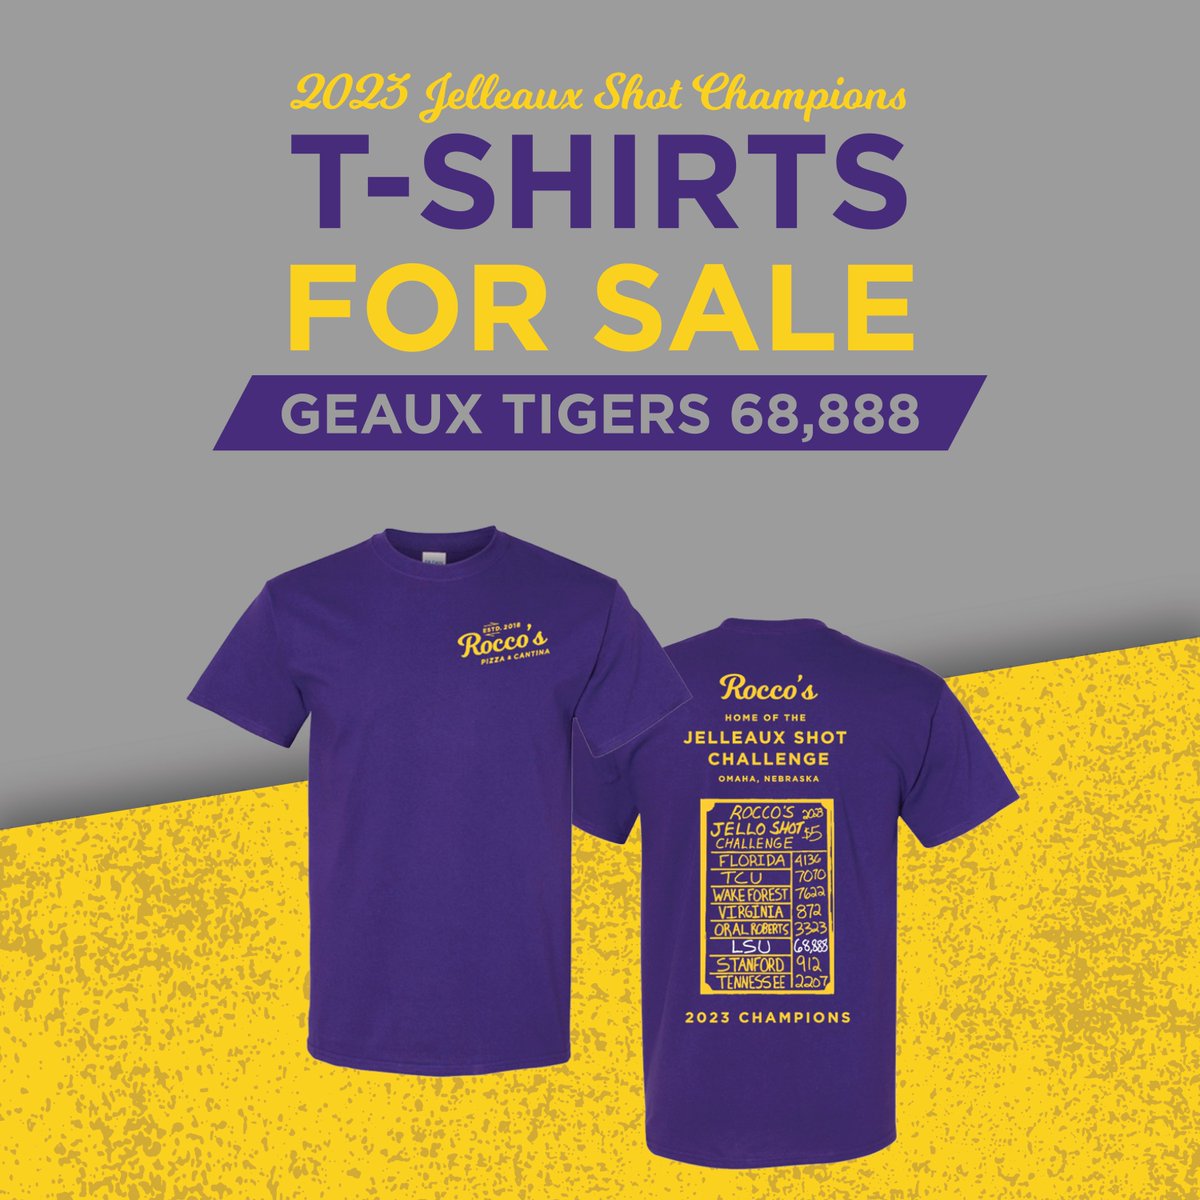 Here we go! Your OFFICIAL 2023 Jelleaux Shot Champion T-Shirts! Congratulations to @LSUbaseball  for your success on and off the field! #cws2023 #RoccosOmaha

store.ideal-images.com/jdtuckerslefty…